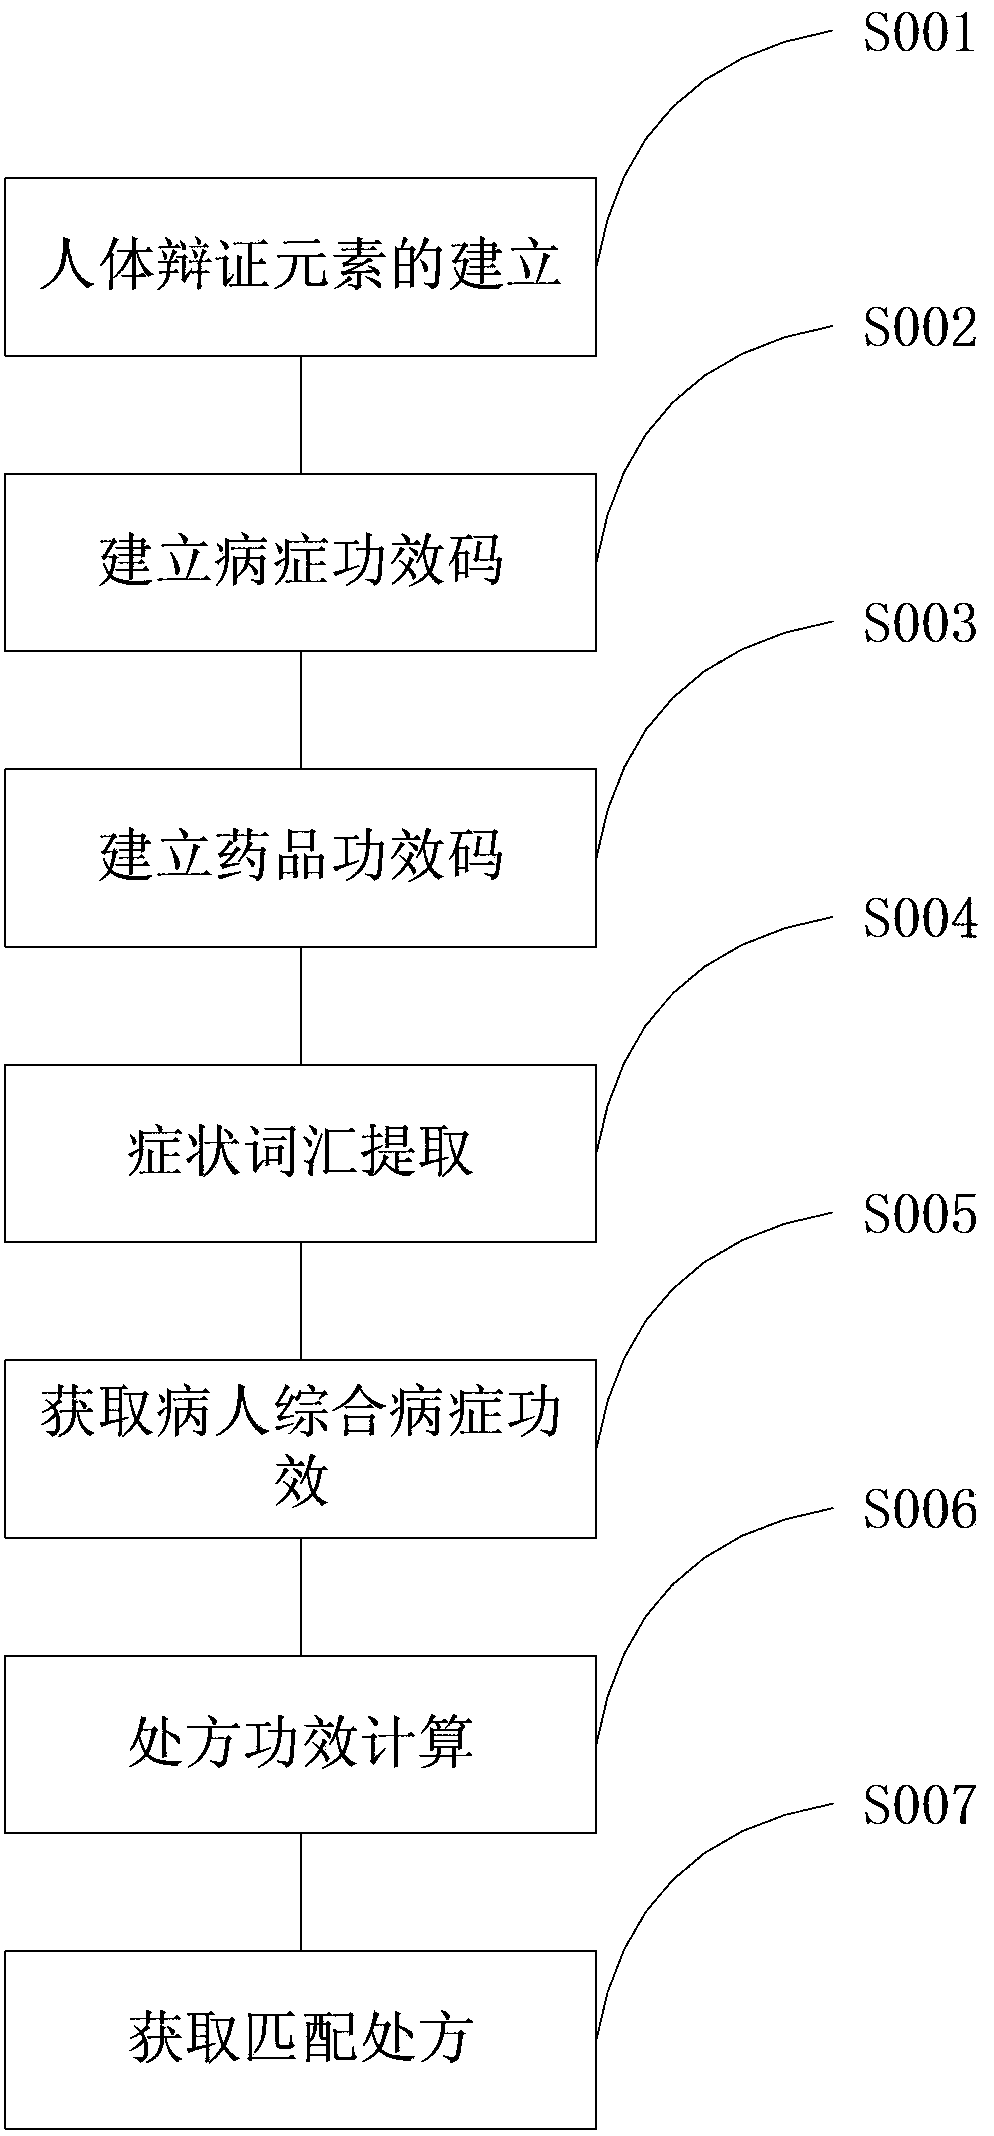 Digital TCM (Traditional Chinese Medicine) computer-aided diagnosis and treatment method